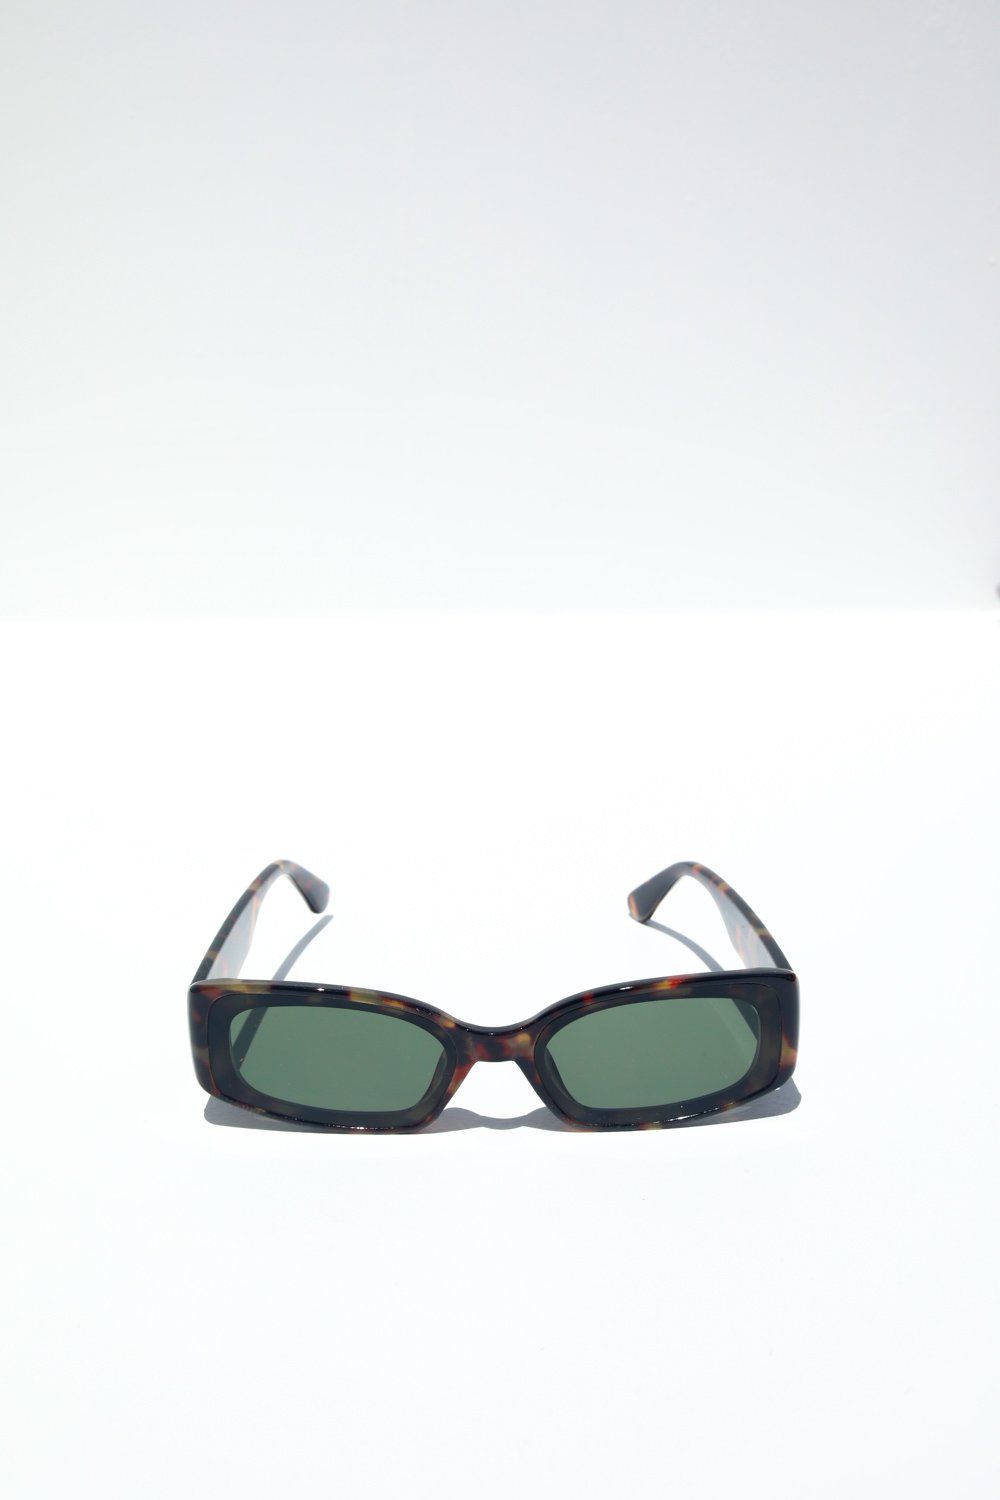 Poolside Sunglasses Sunglasses Mulberry & Grand Tortoise with Green Lens 